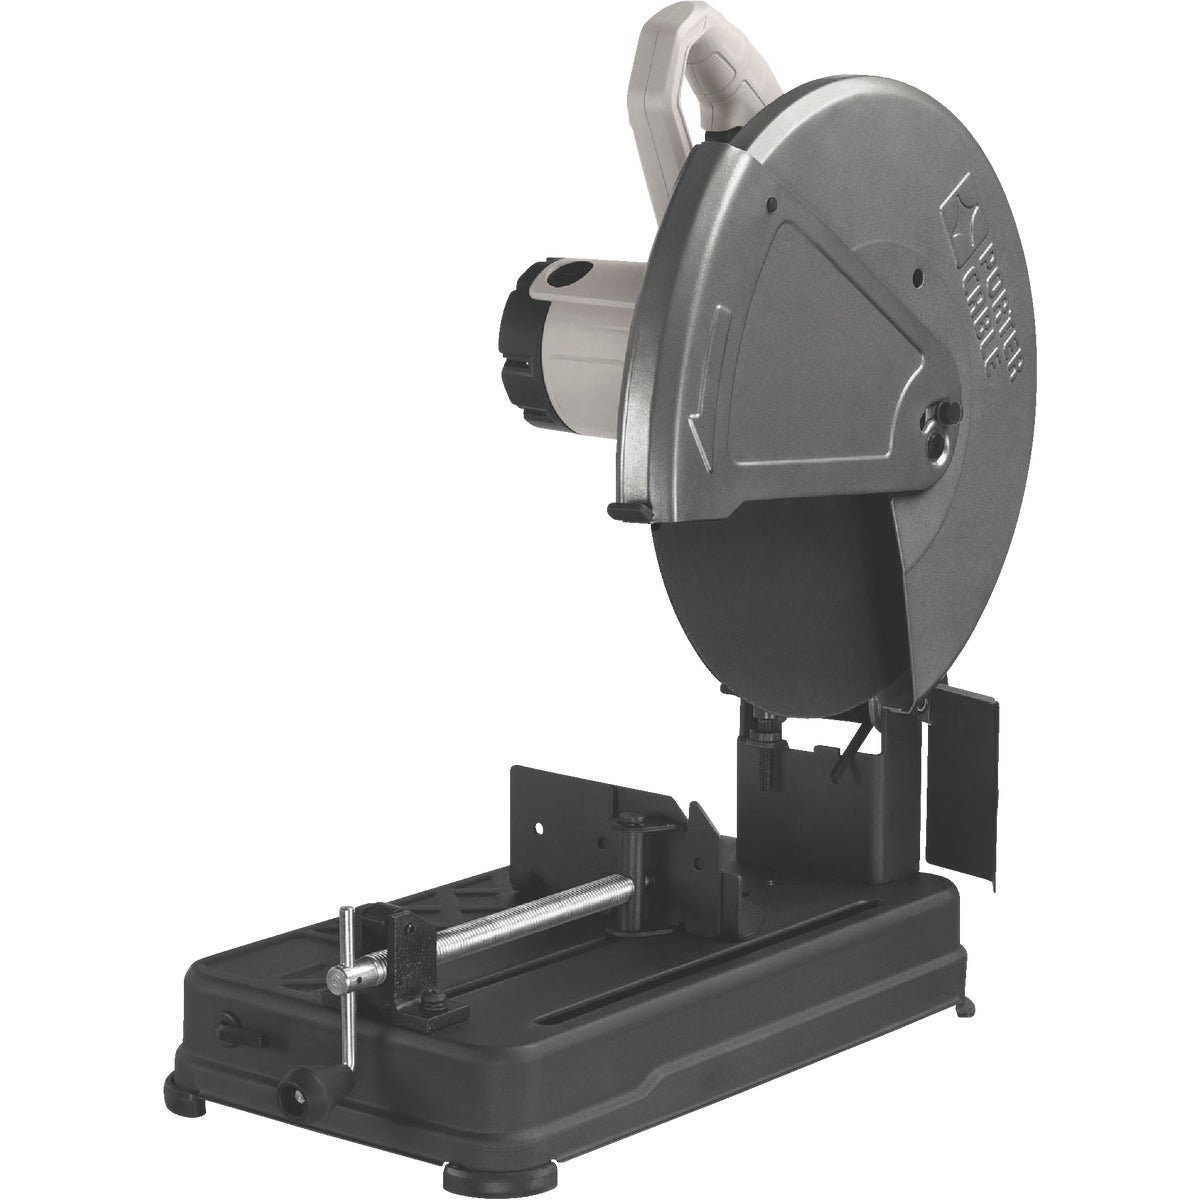 Item 300192, 15A, 3800 rpm motor with replaceable brushes provides power and durability